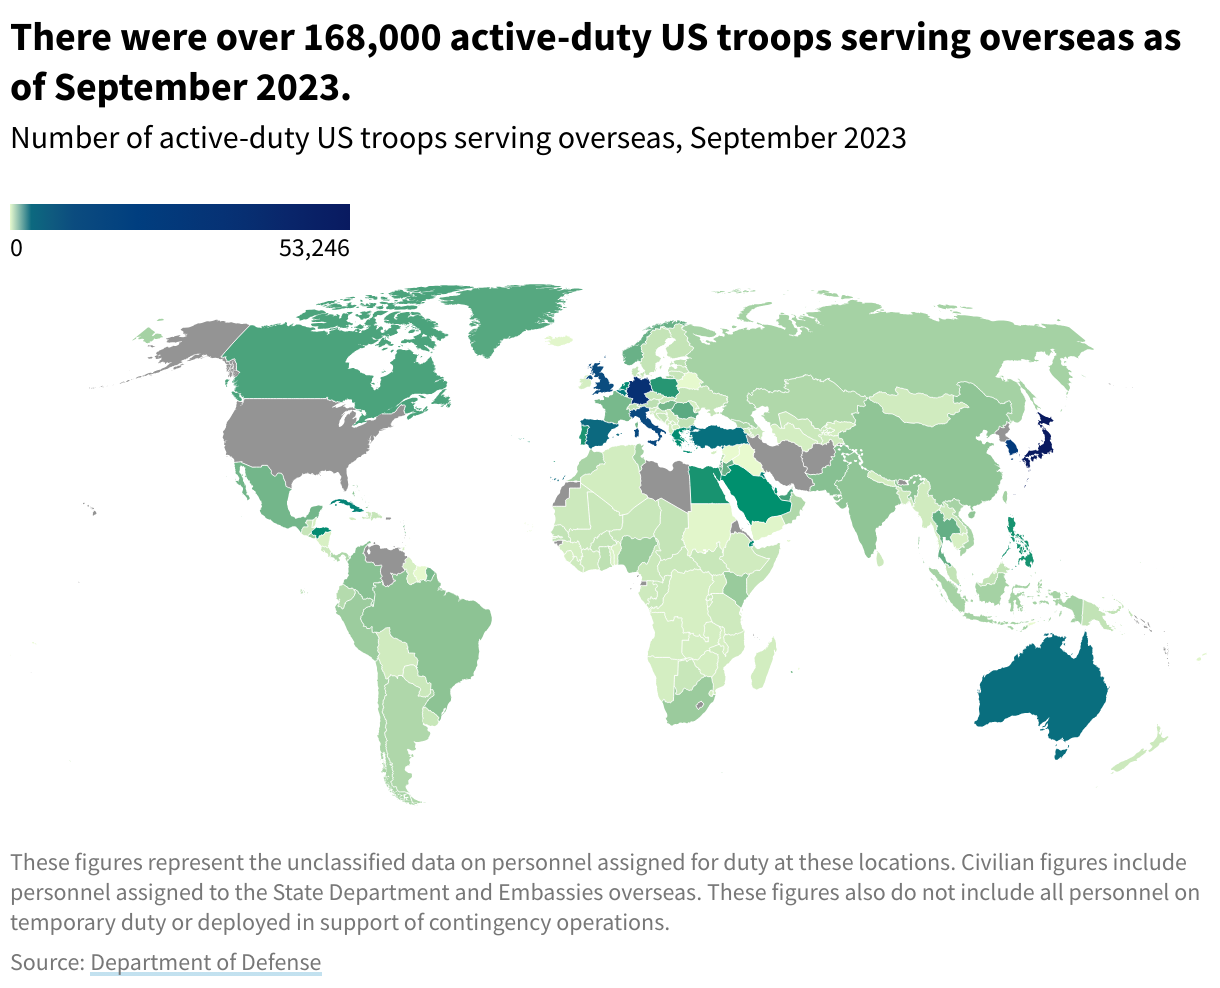 A map of the world depicting the number of active-duty US troops by country as of September 2023. 